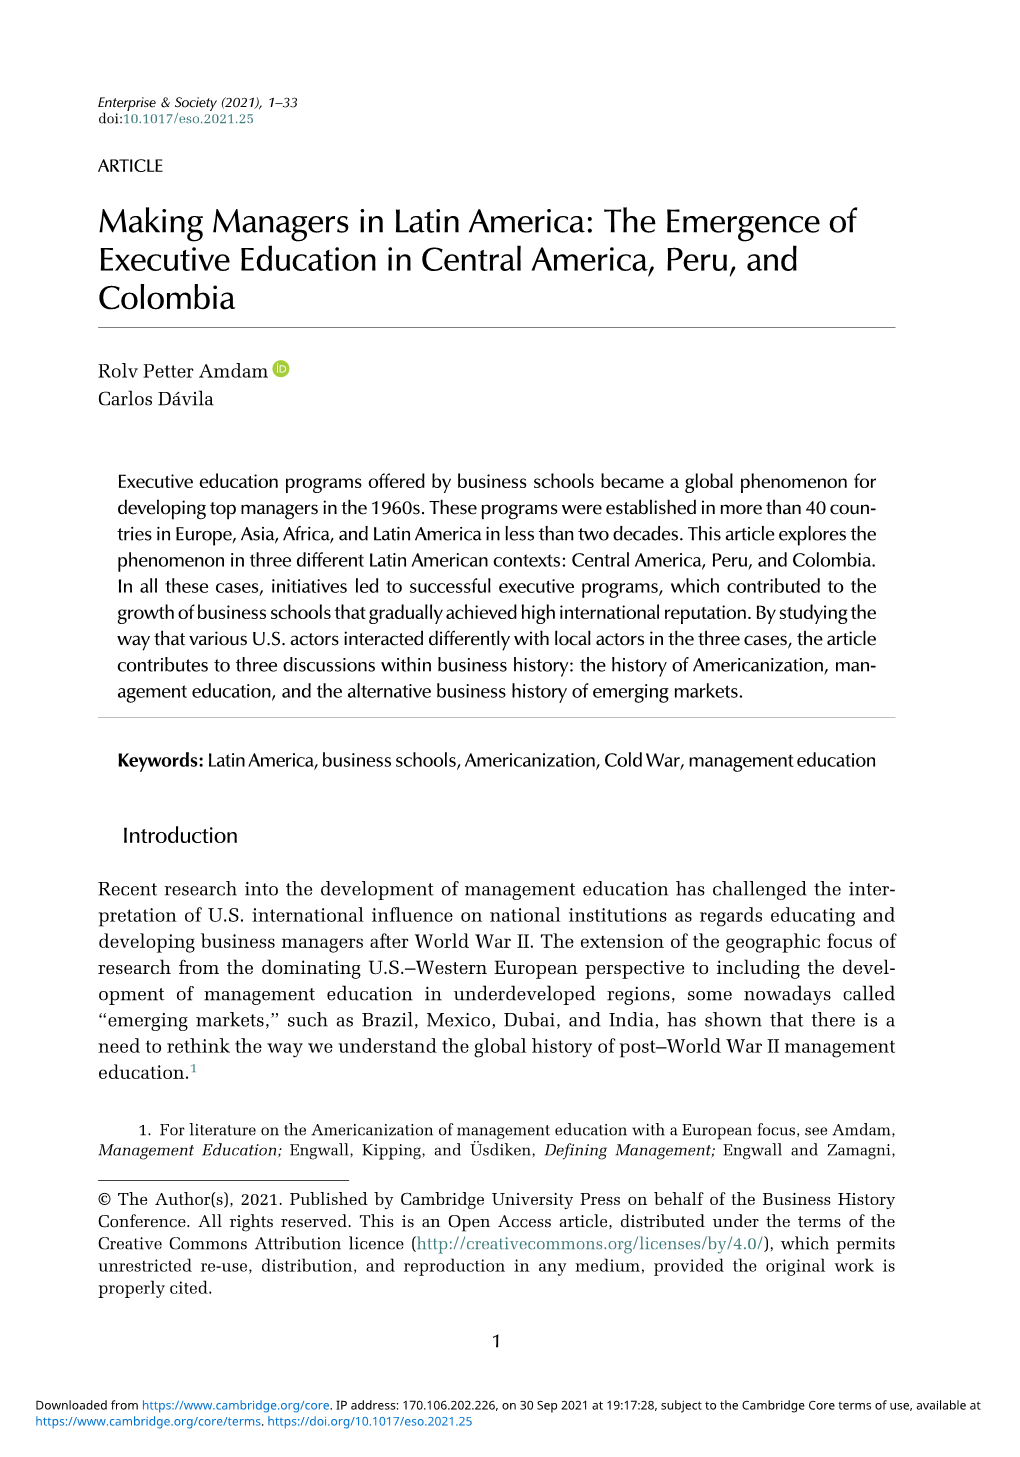 Making Managers in Latin America: the Emergence of Executive Education in Central America, Peru, and Colombia